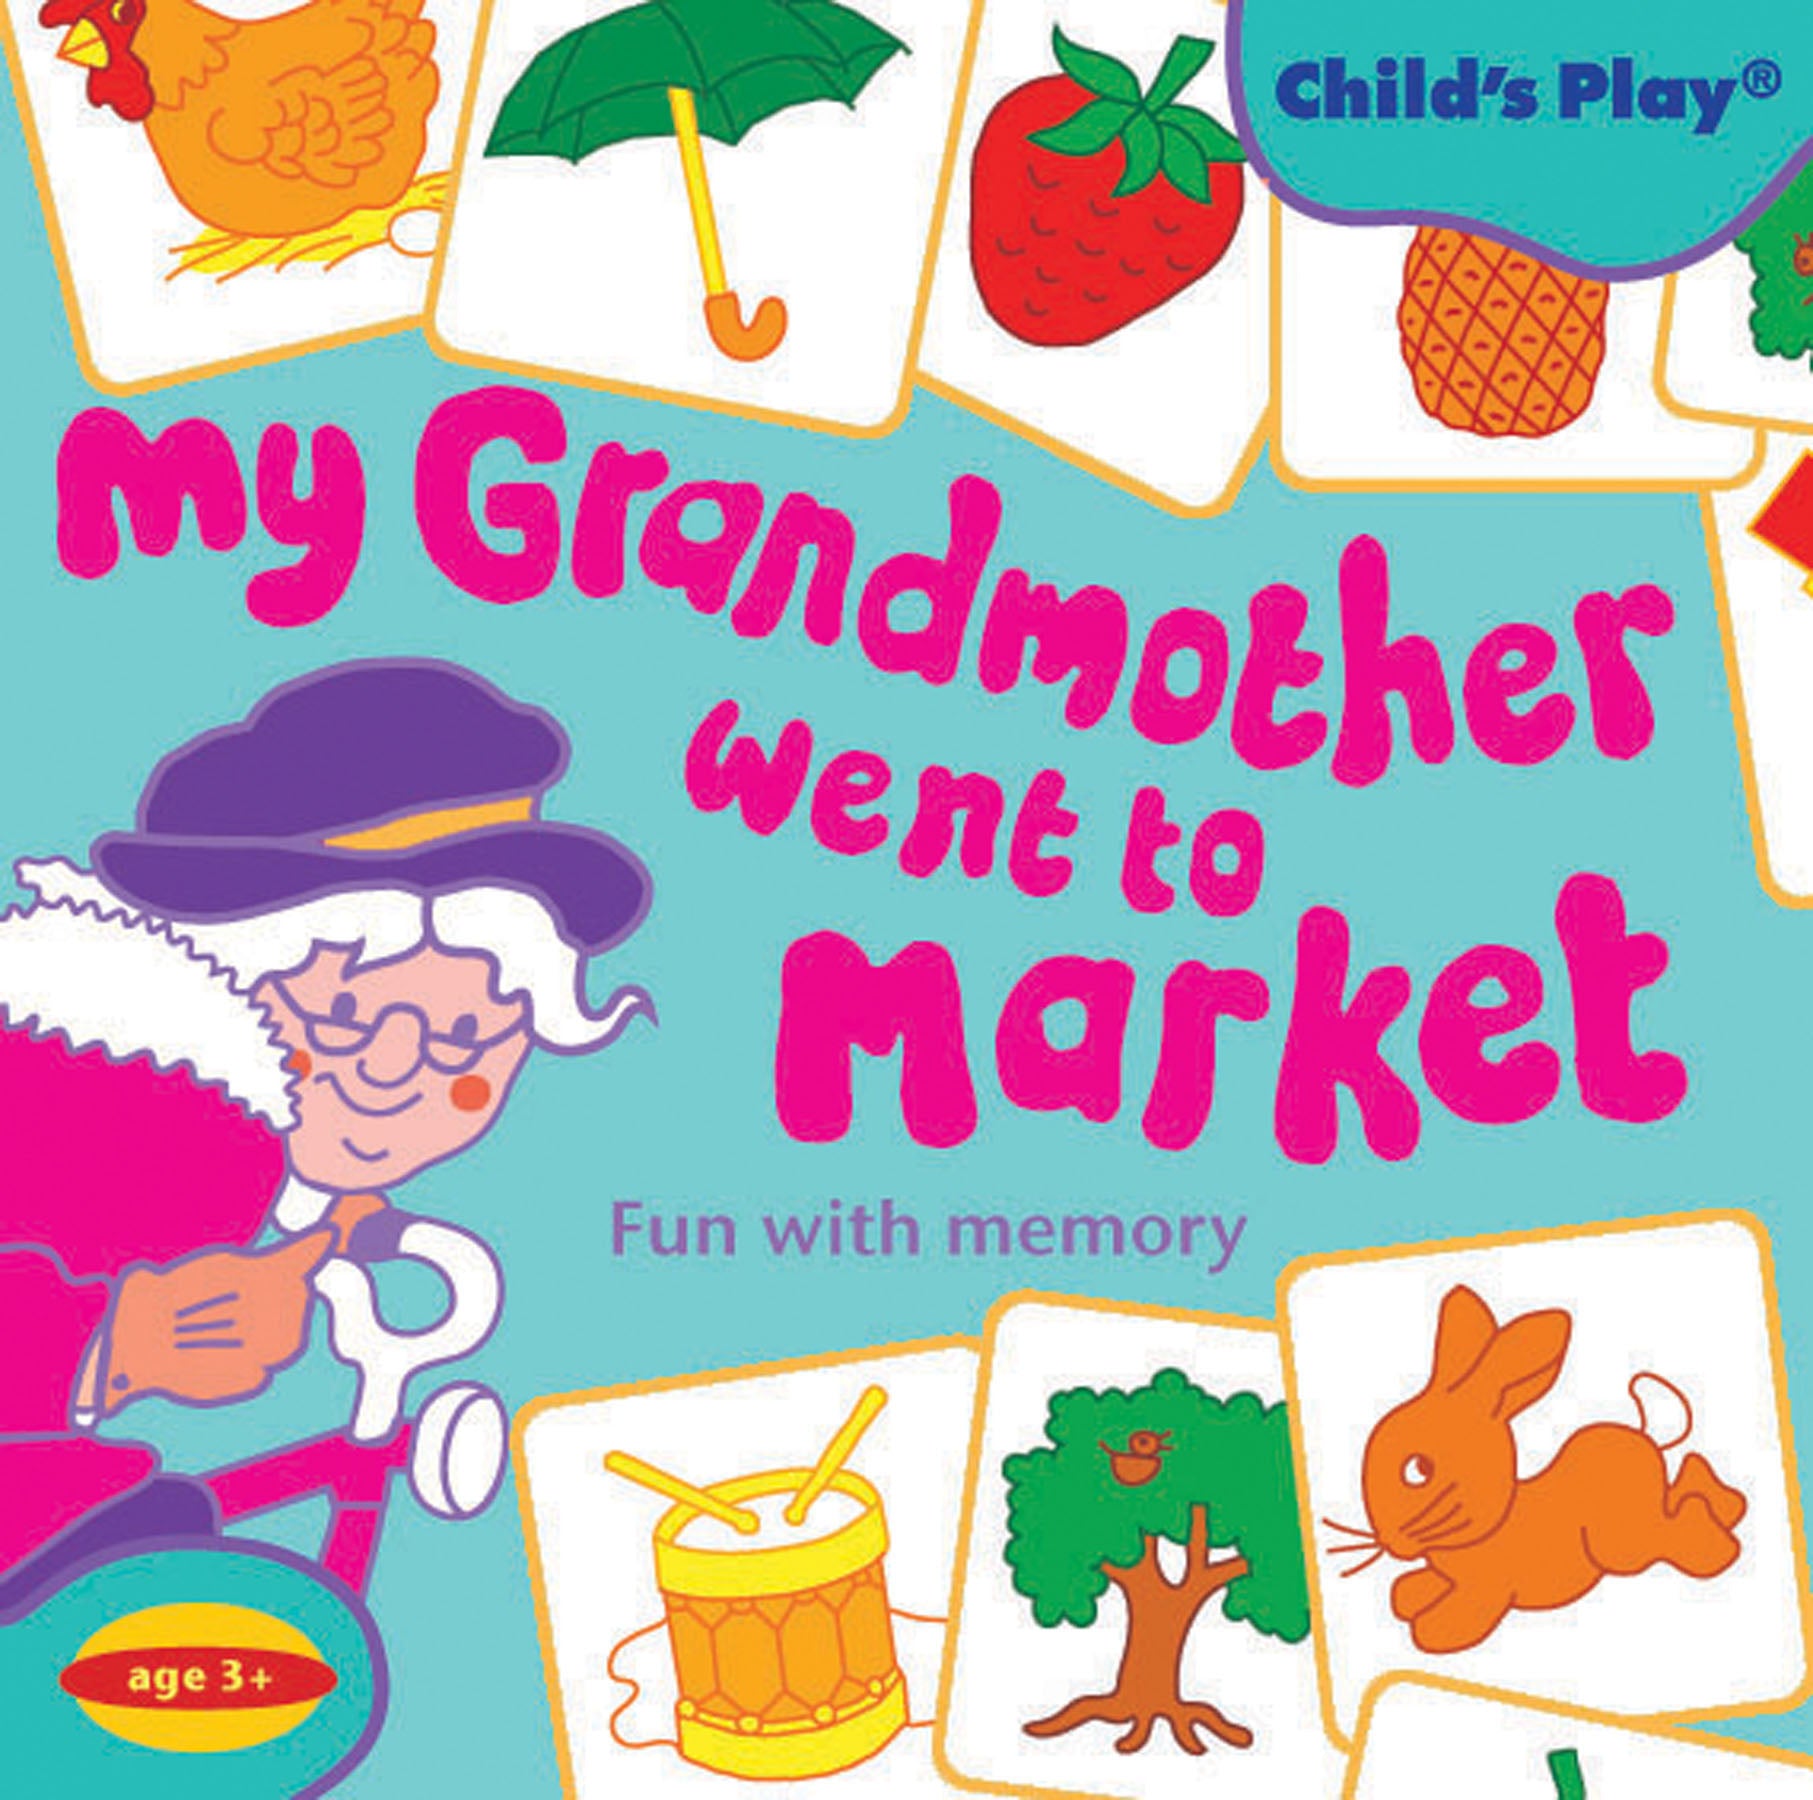 My Grandmother went to Market